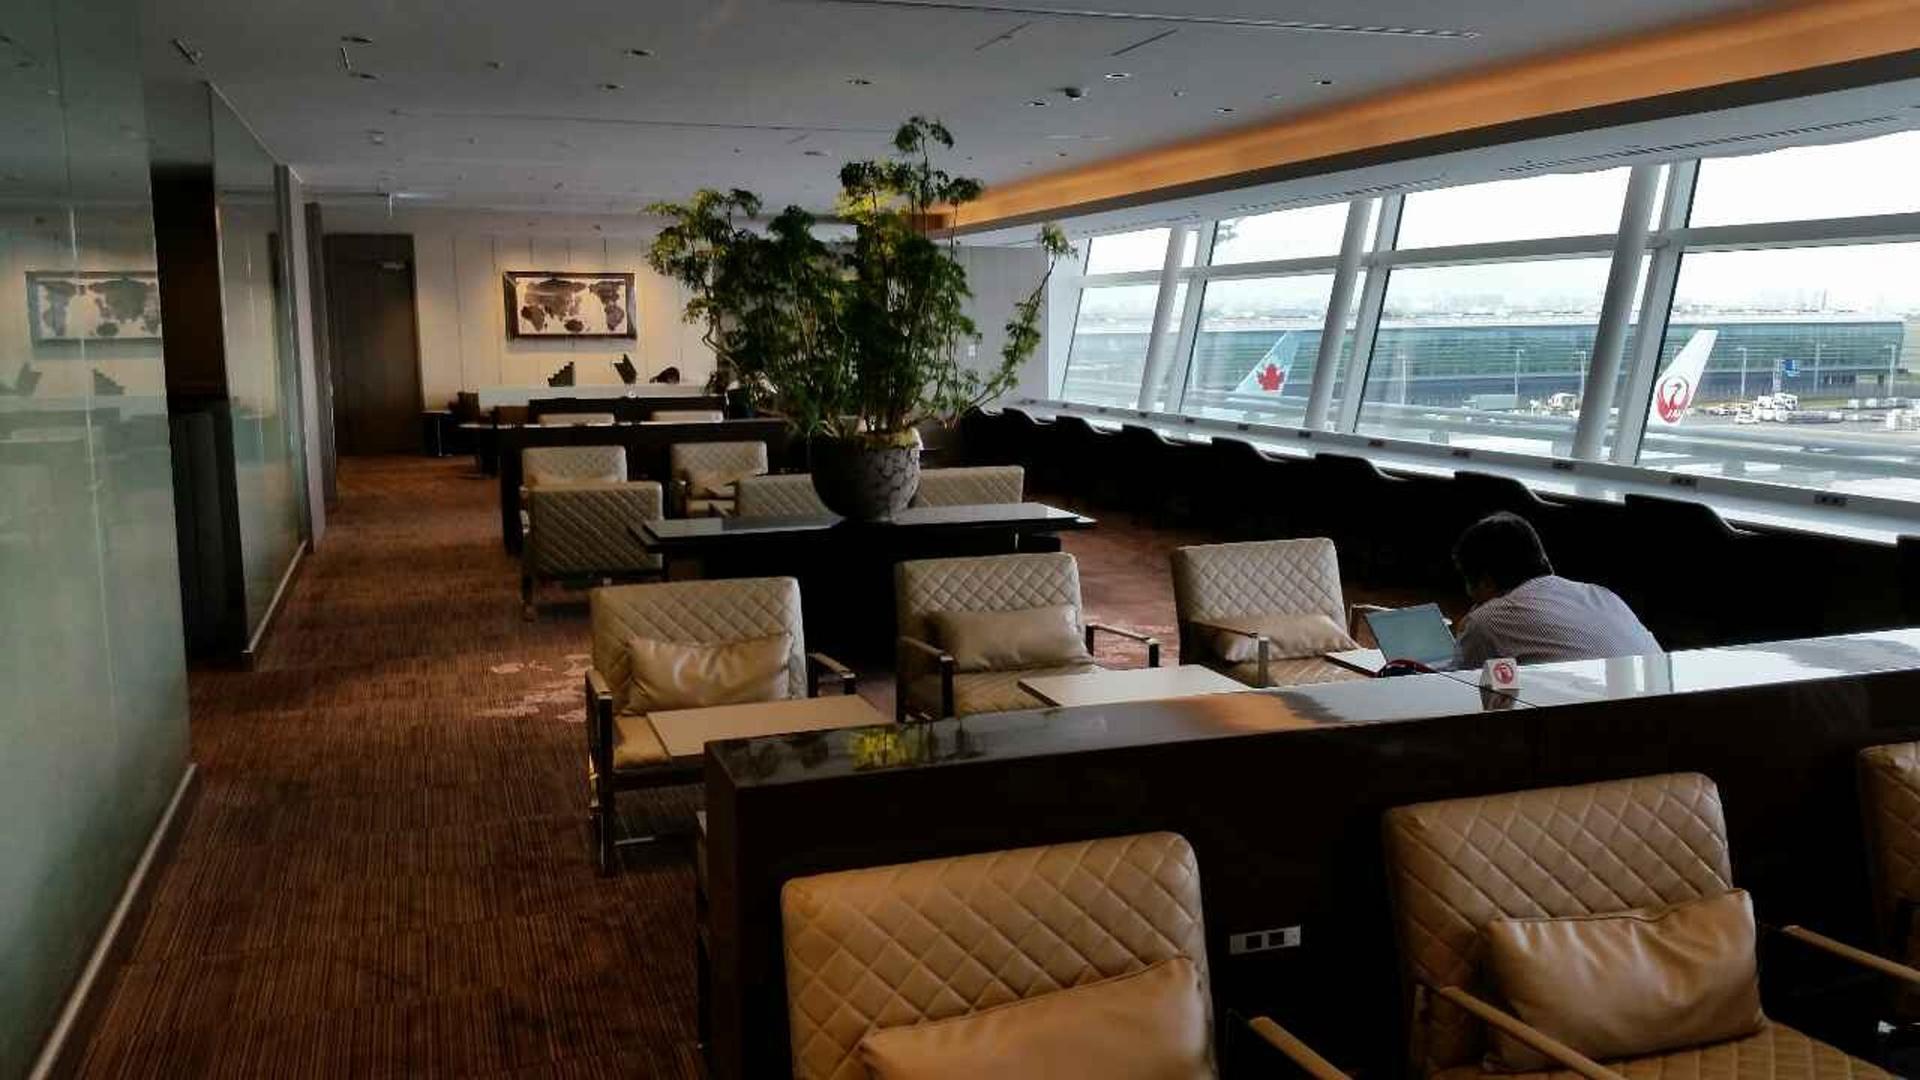 Japan Airlines JAL First Class Lounge image 38 of 43